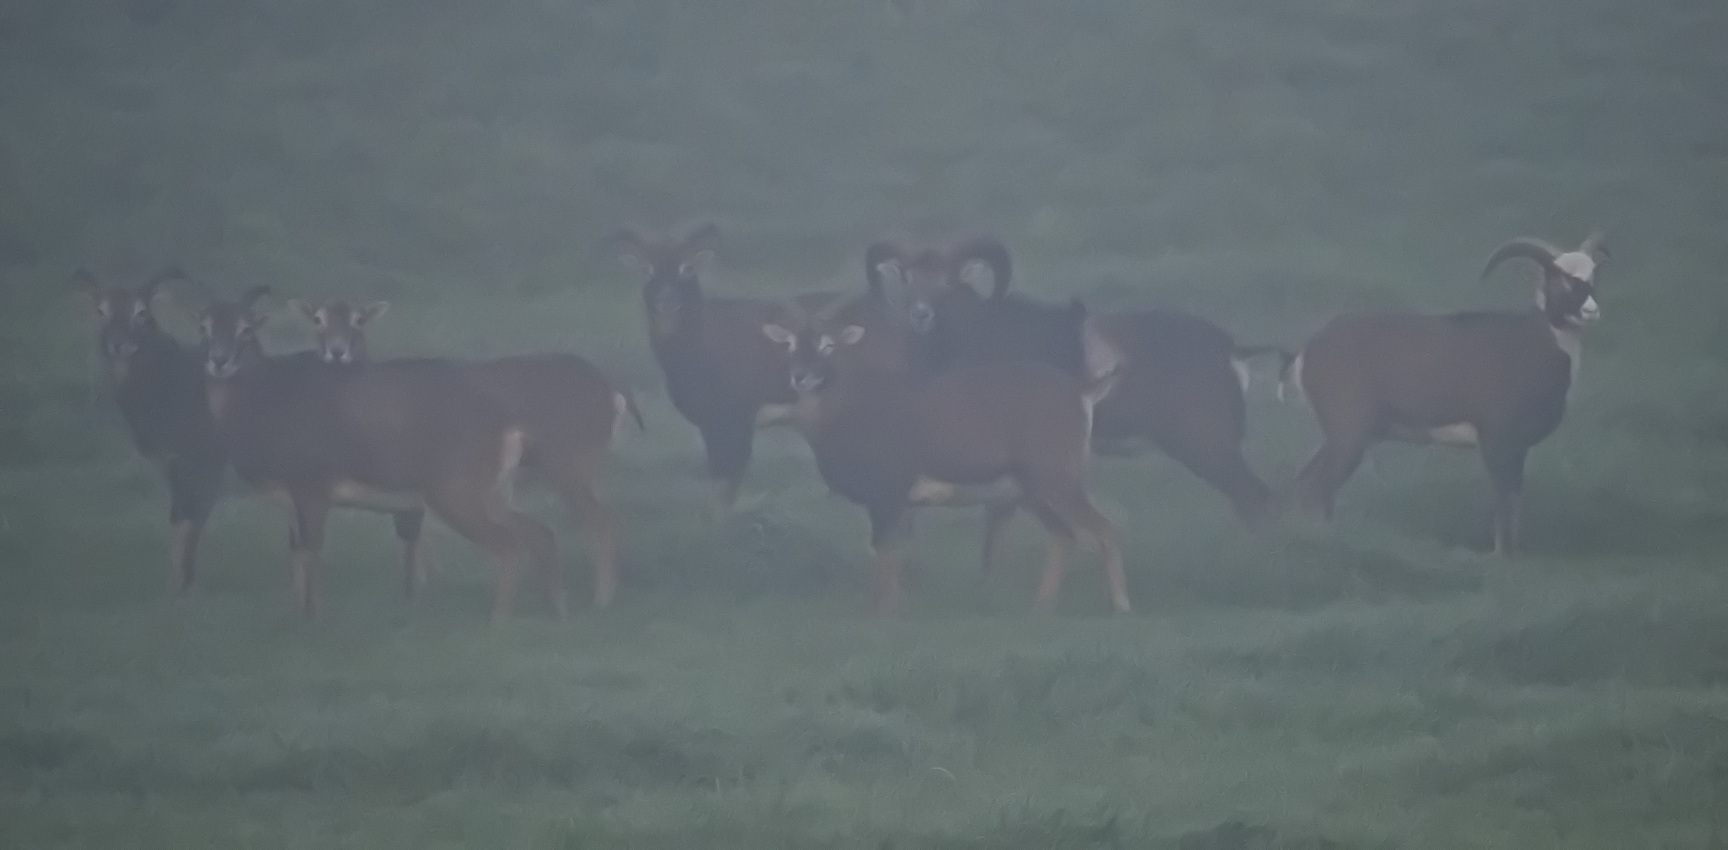 Mouflons in the early morning mist